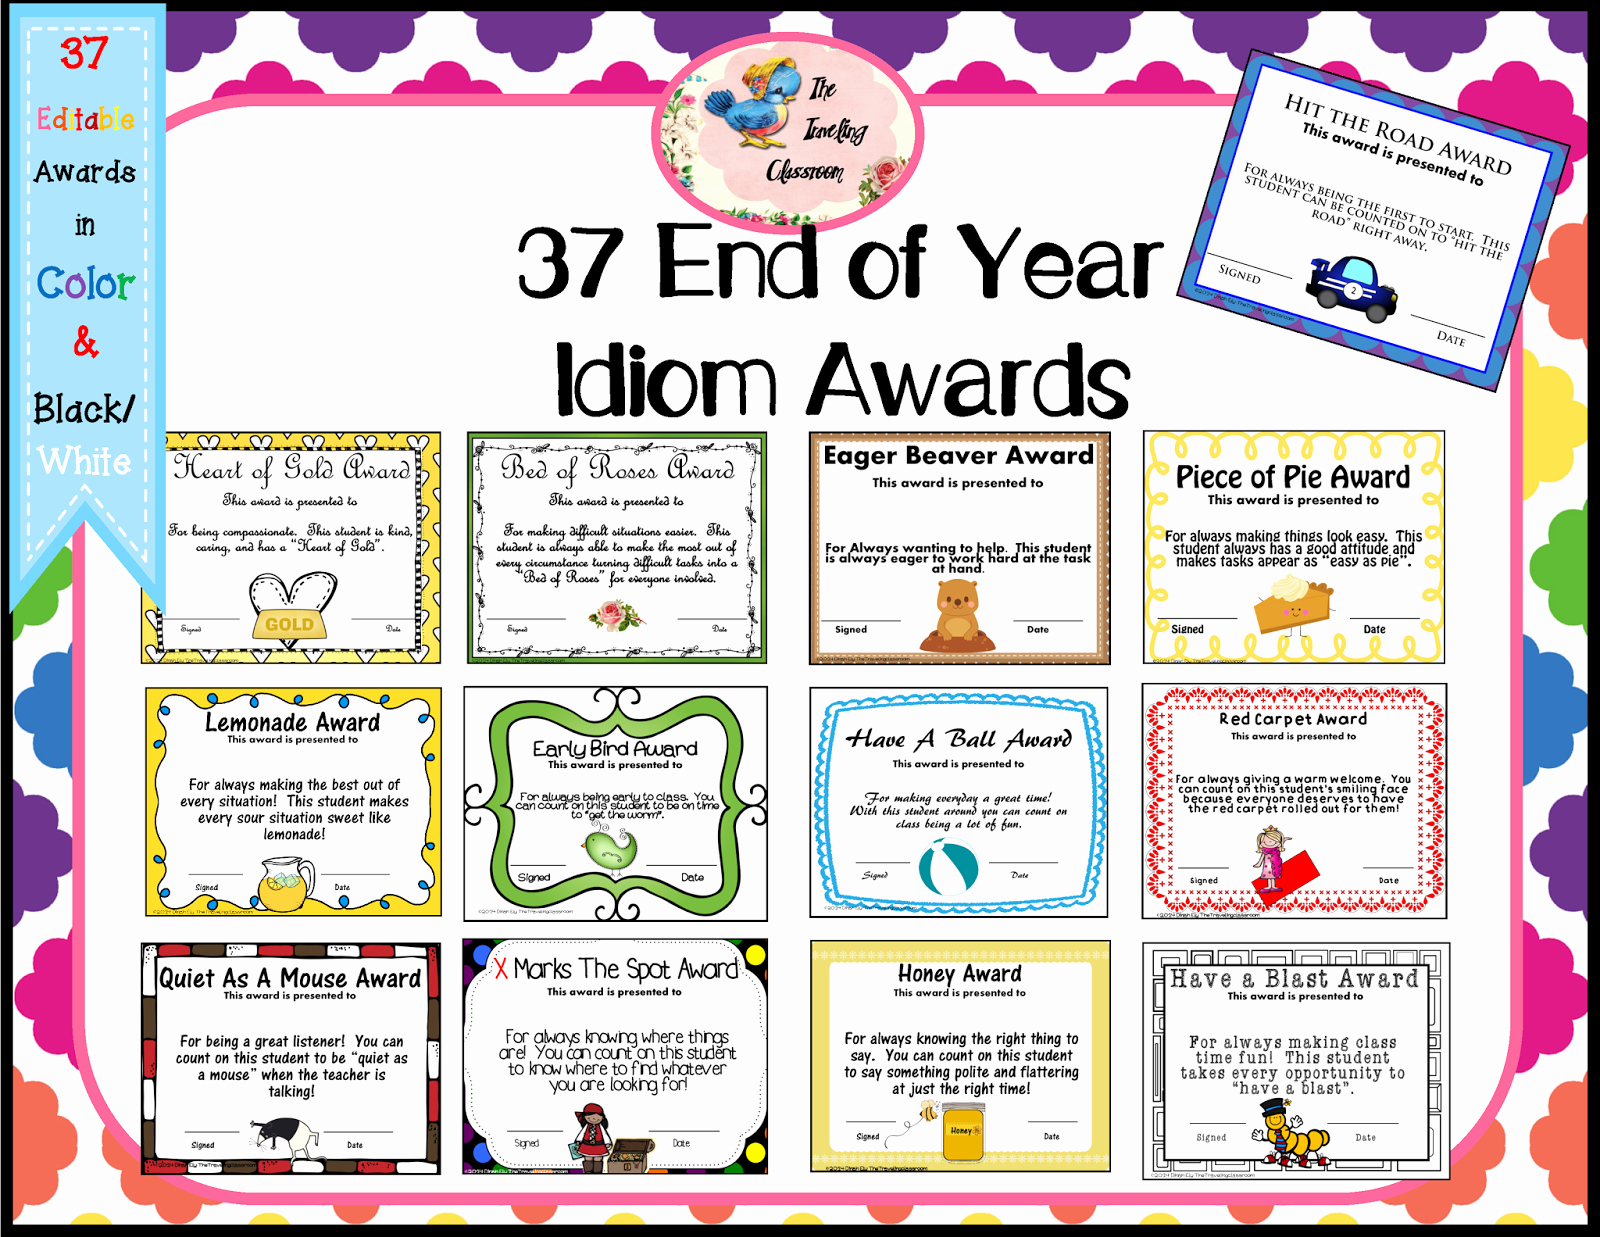 Fun Award Ideas for Students New the Traveling Classroom End Of the Year Idiom Awards